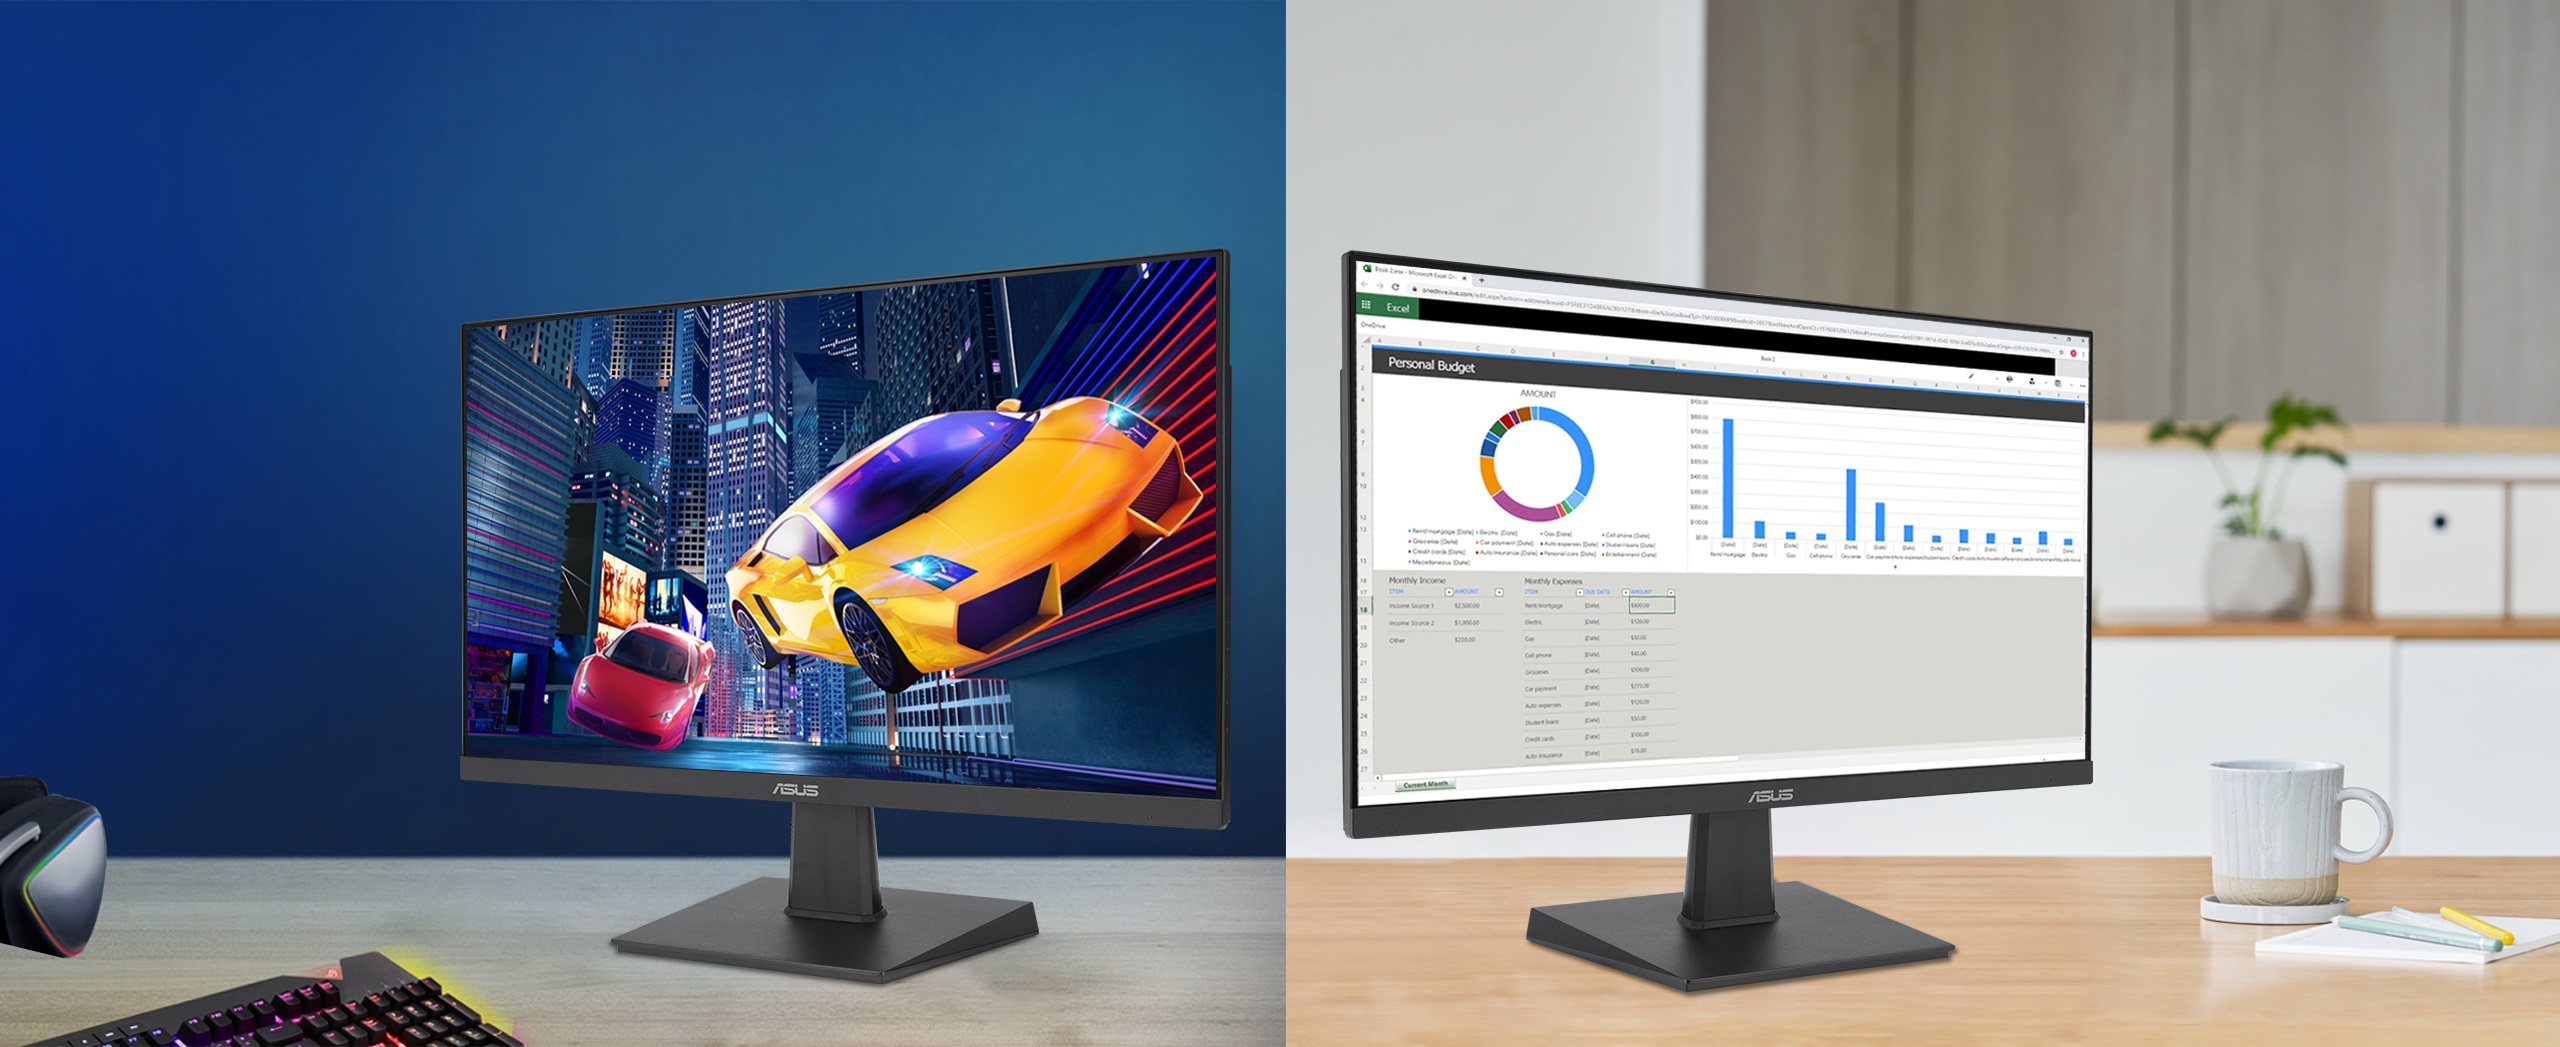 ASUS VA24EHF-P is 23.8-inch IPS Eye Care Gaming monitor with fast 100Hz refresh rate and Adaptive-Sync technology to eliminate screen tearing and choppy frame rates for the smoother-than-ever experience.